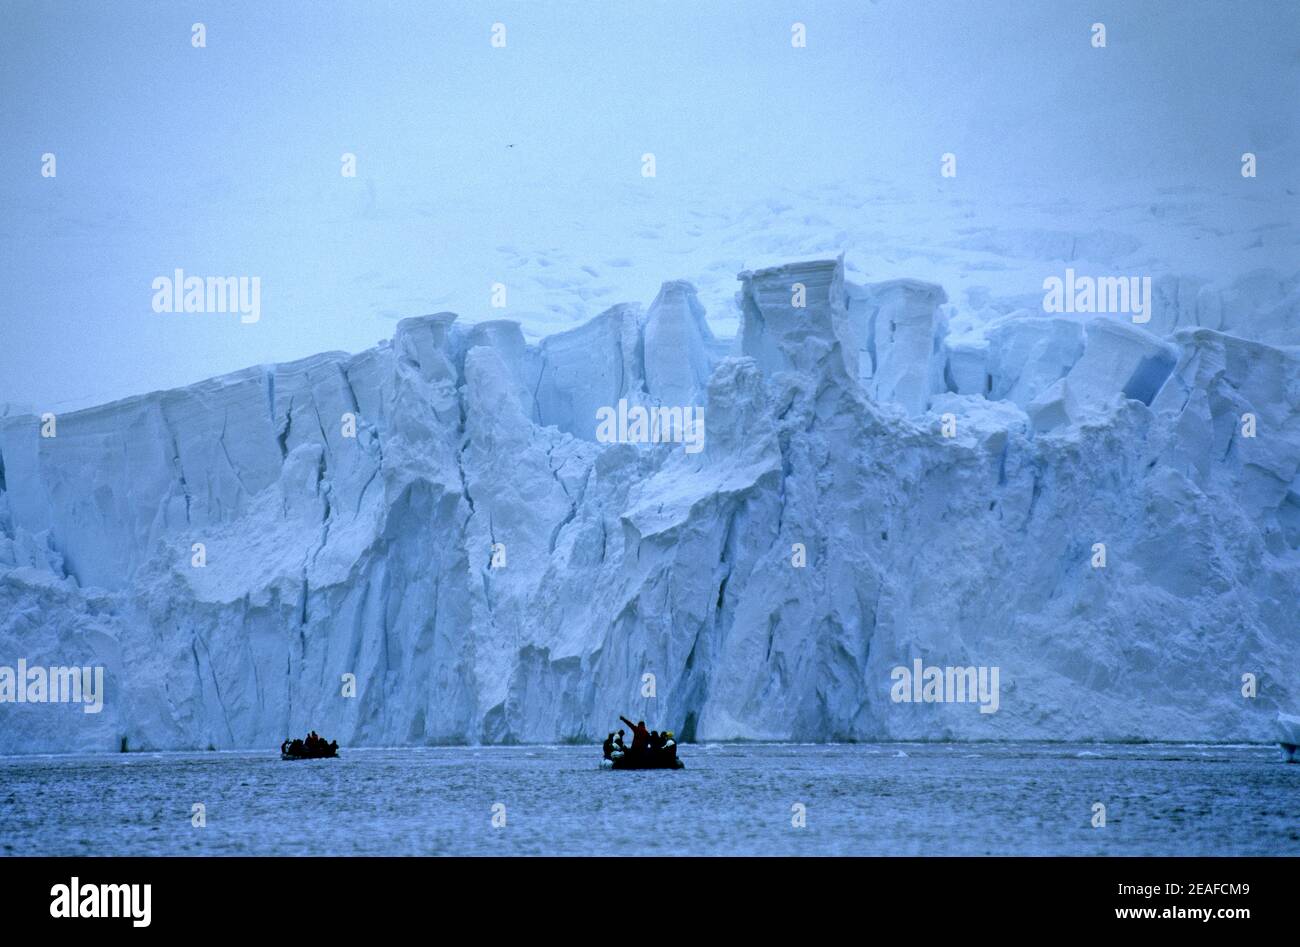 Big glacier with high ice wall being visited by tourists in a zodiac on Antarctica Stock Photo